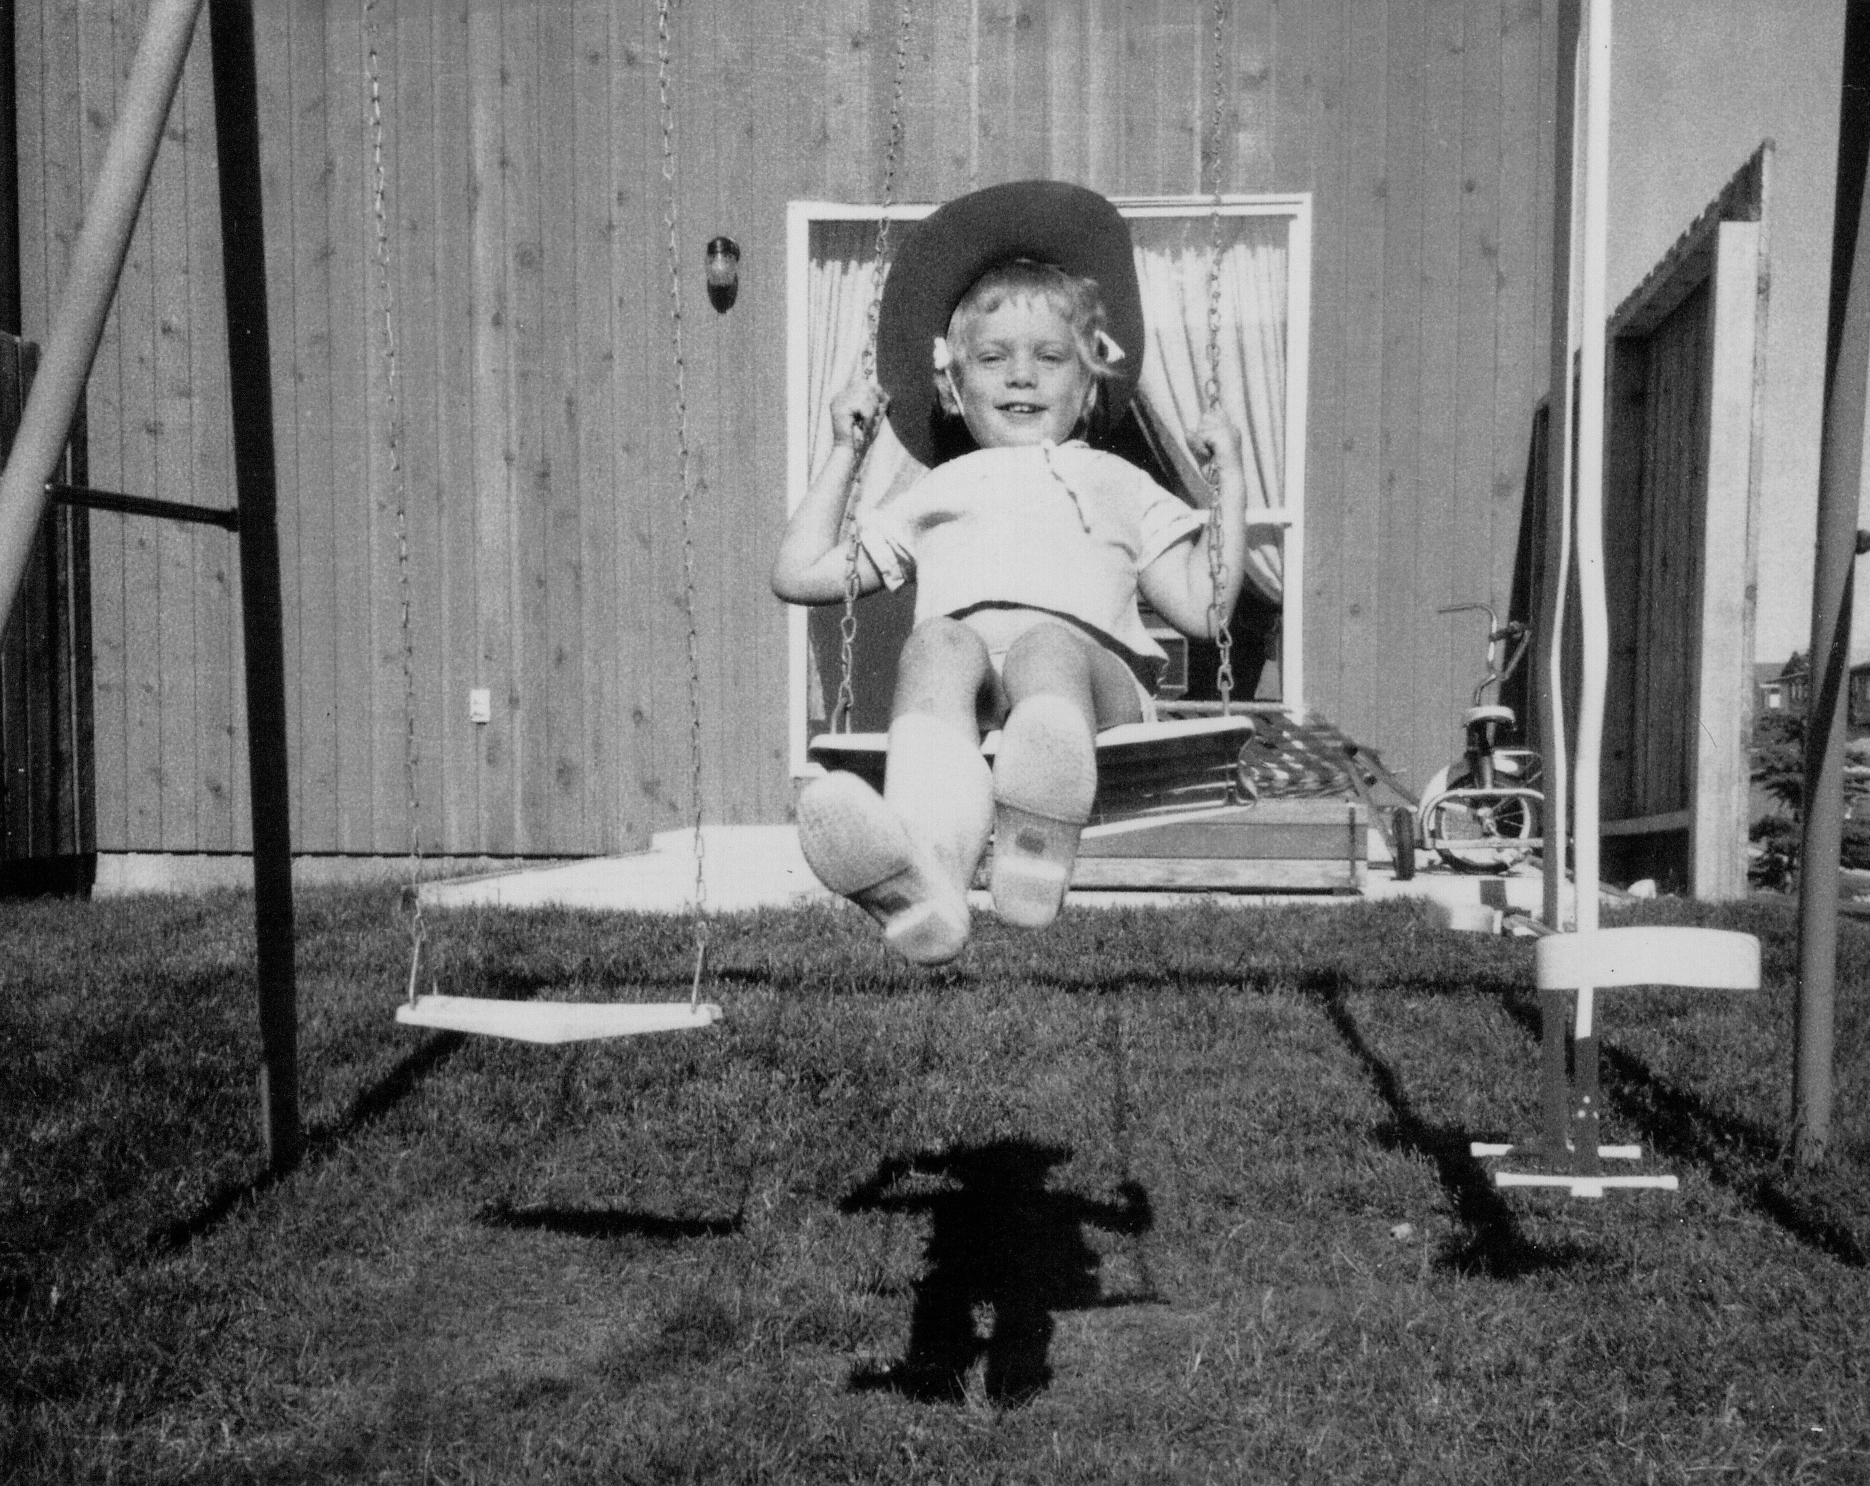 Christine, at 4 years old, on the swings